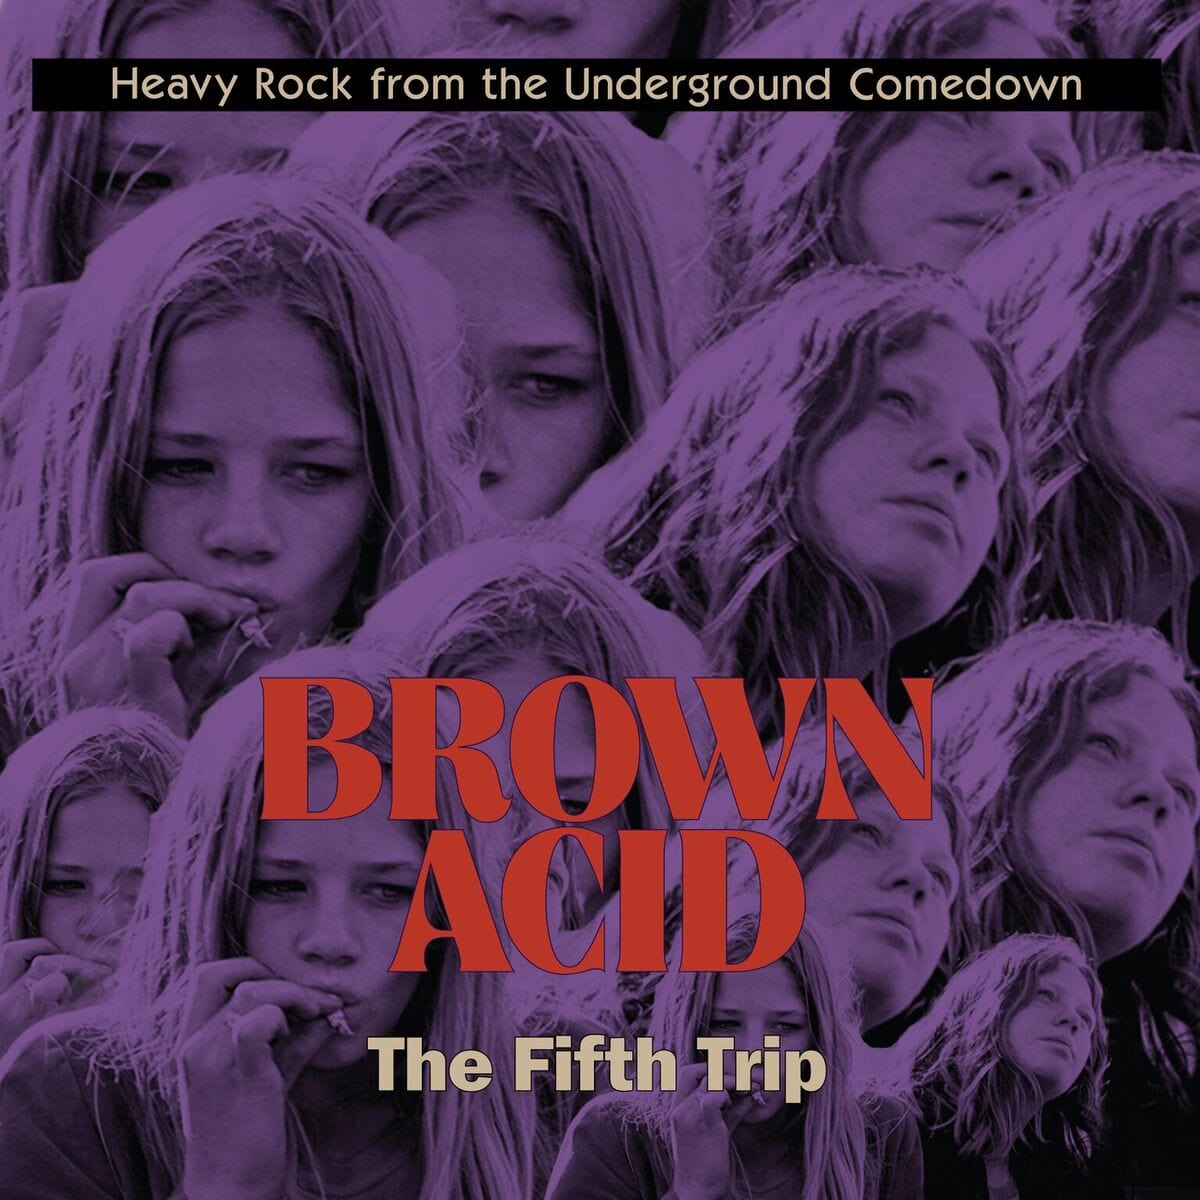 Copy of BROWN ACID: The Fifth Trip - Heavy Rock from the American Comedown Era compilation LP